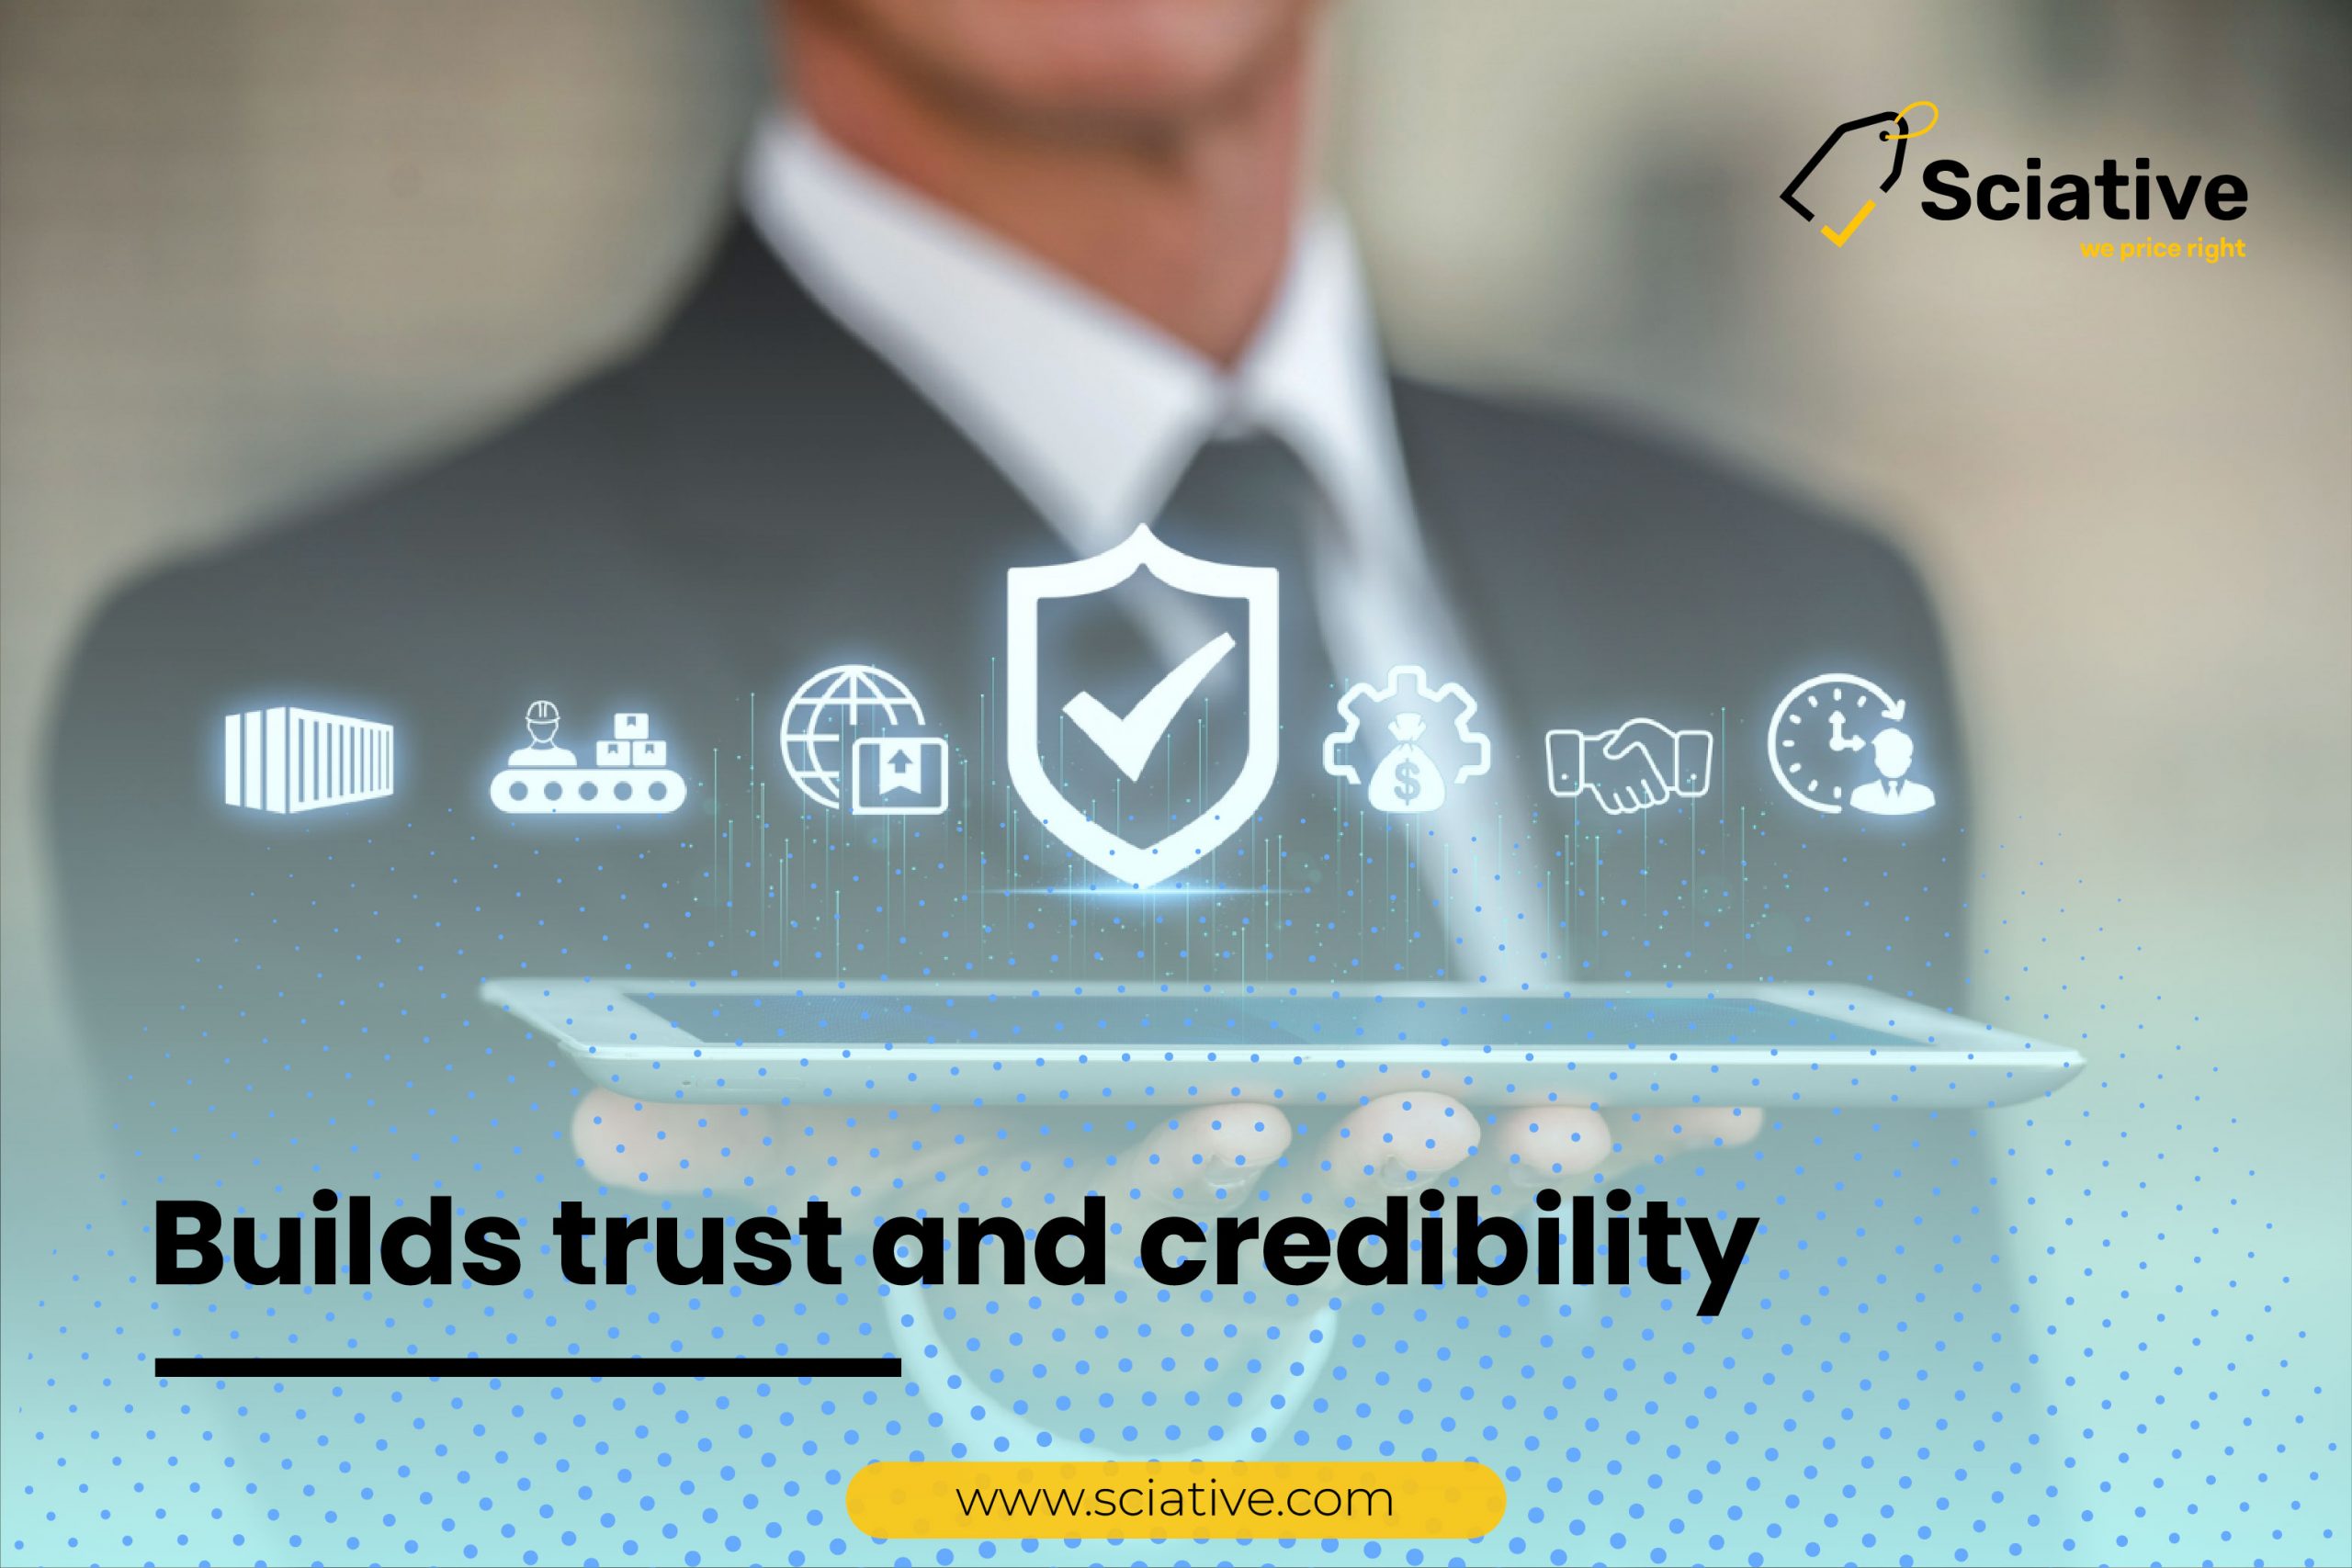 Build trust and credibility